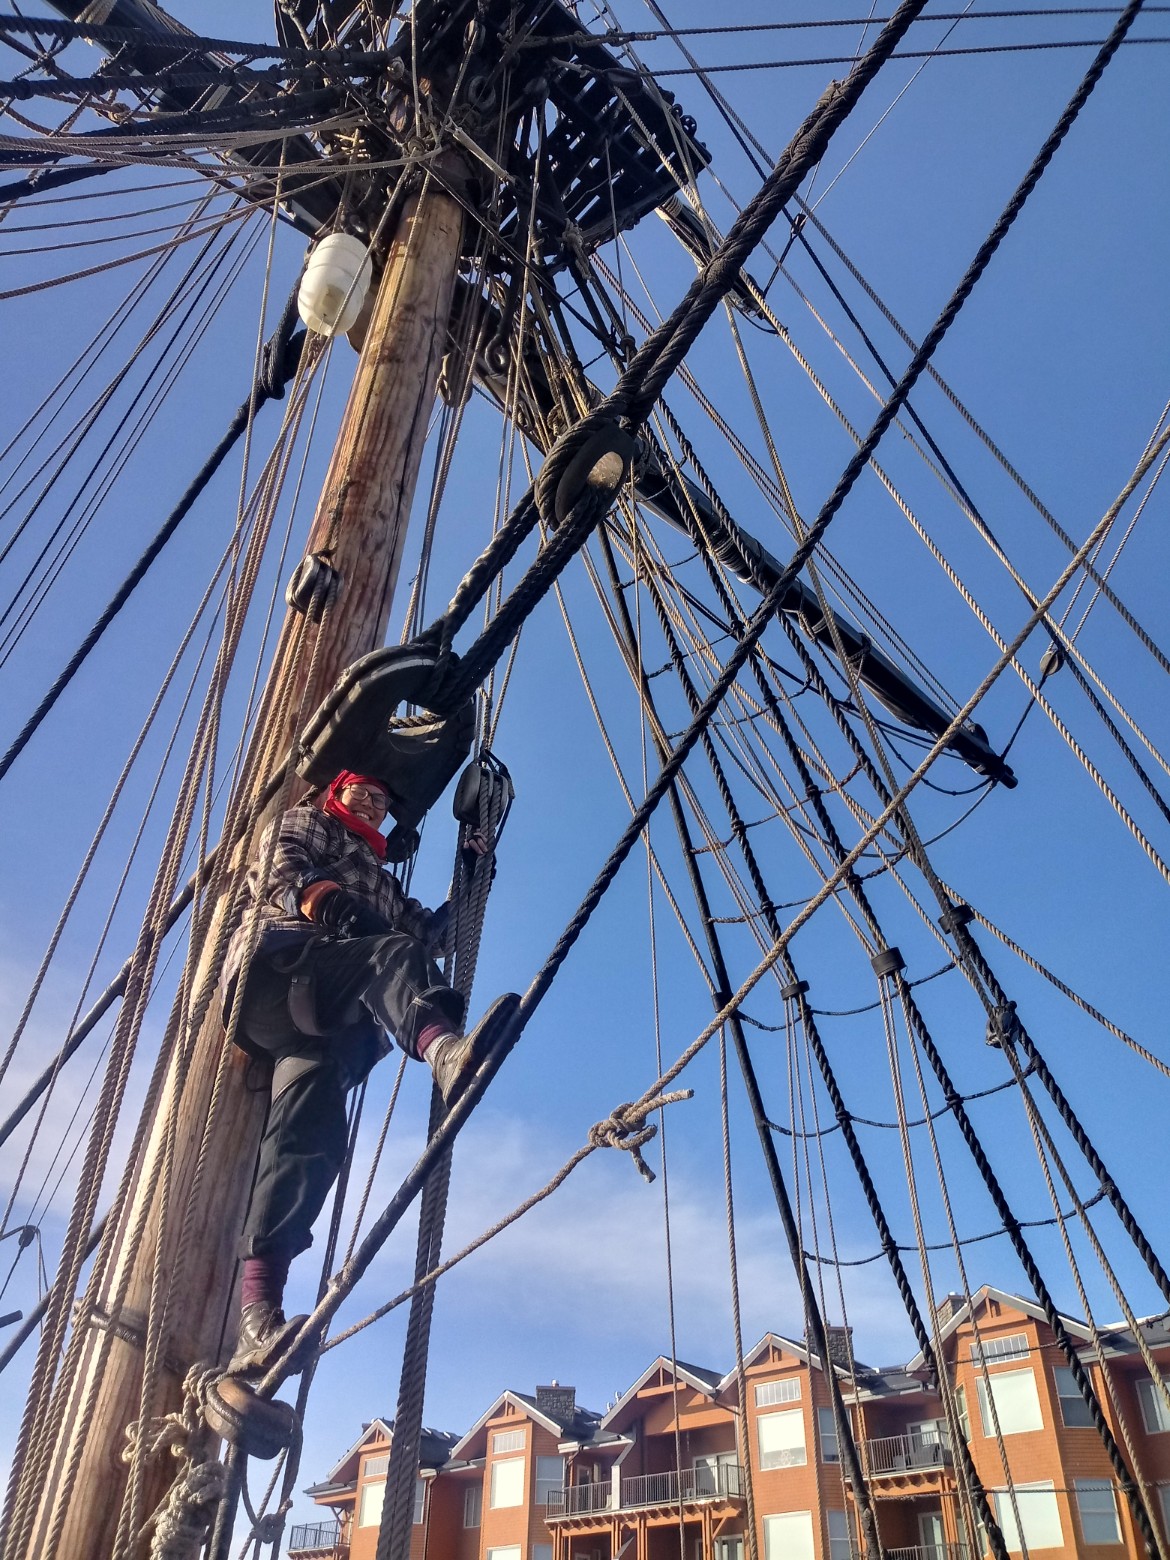 Looking up to a woman standing on the rigging lines (ropes) in front of the ship's mast